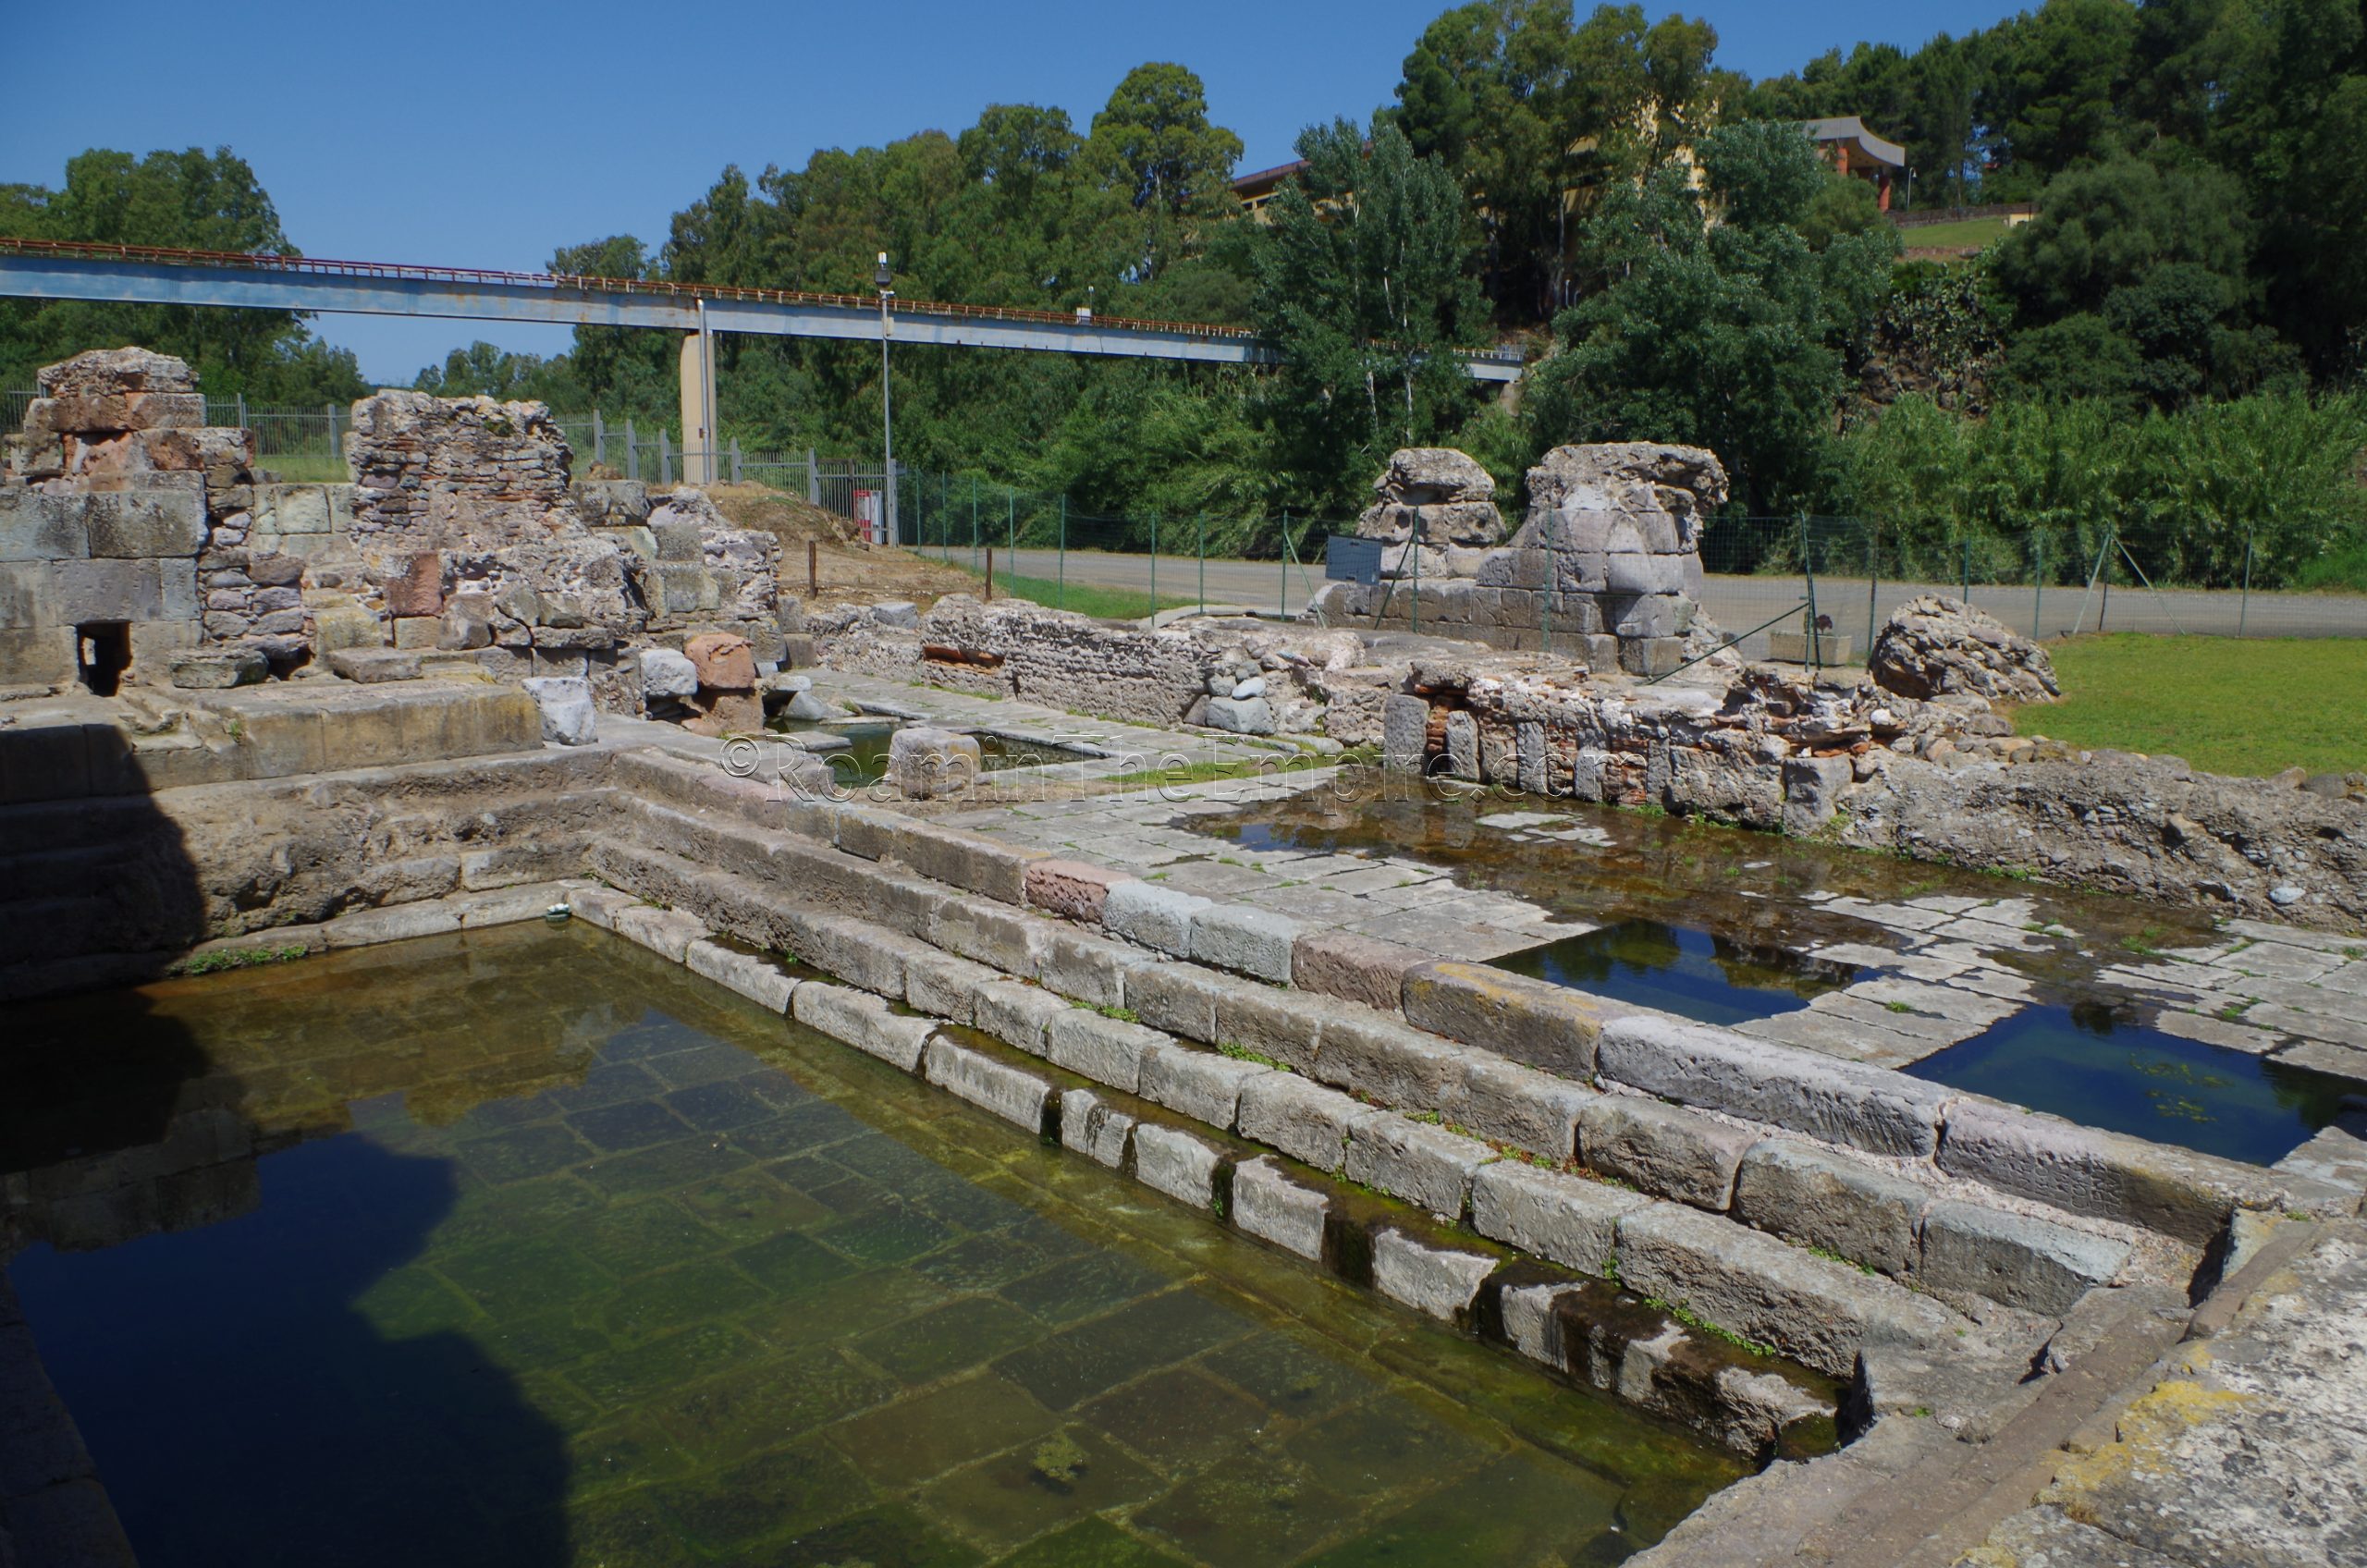 Natatio and warm pools of the 1st century CE complex.